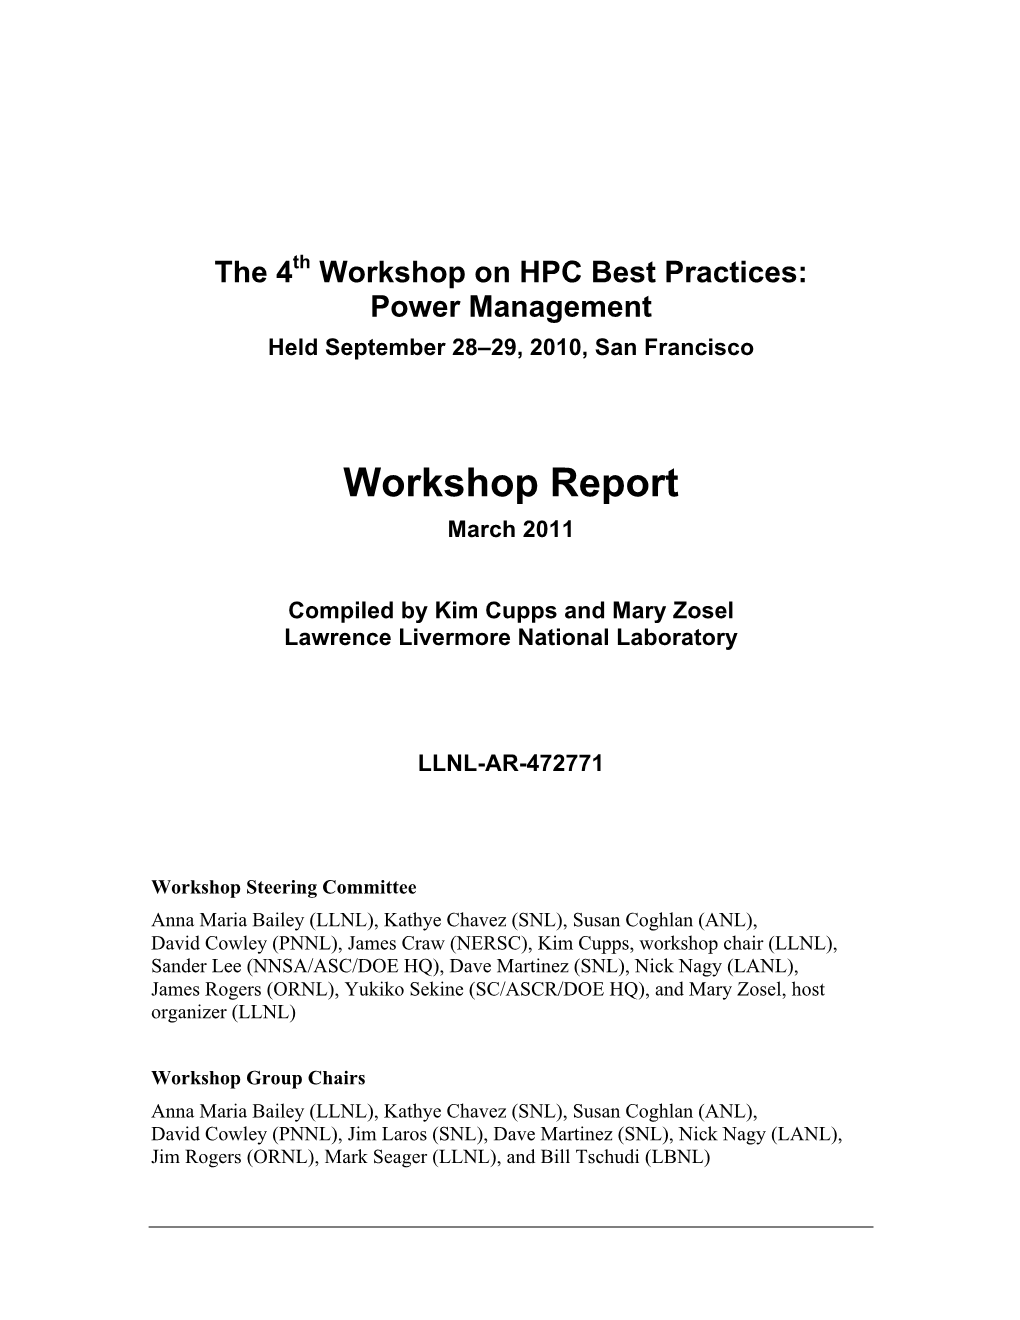 Workshop Report March 2011